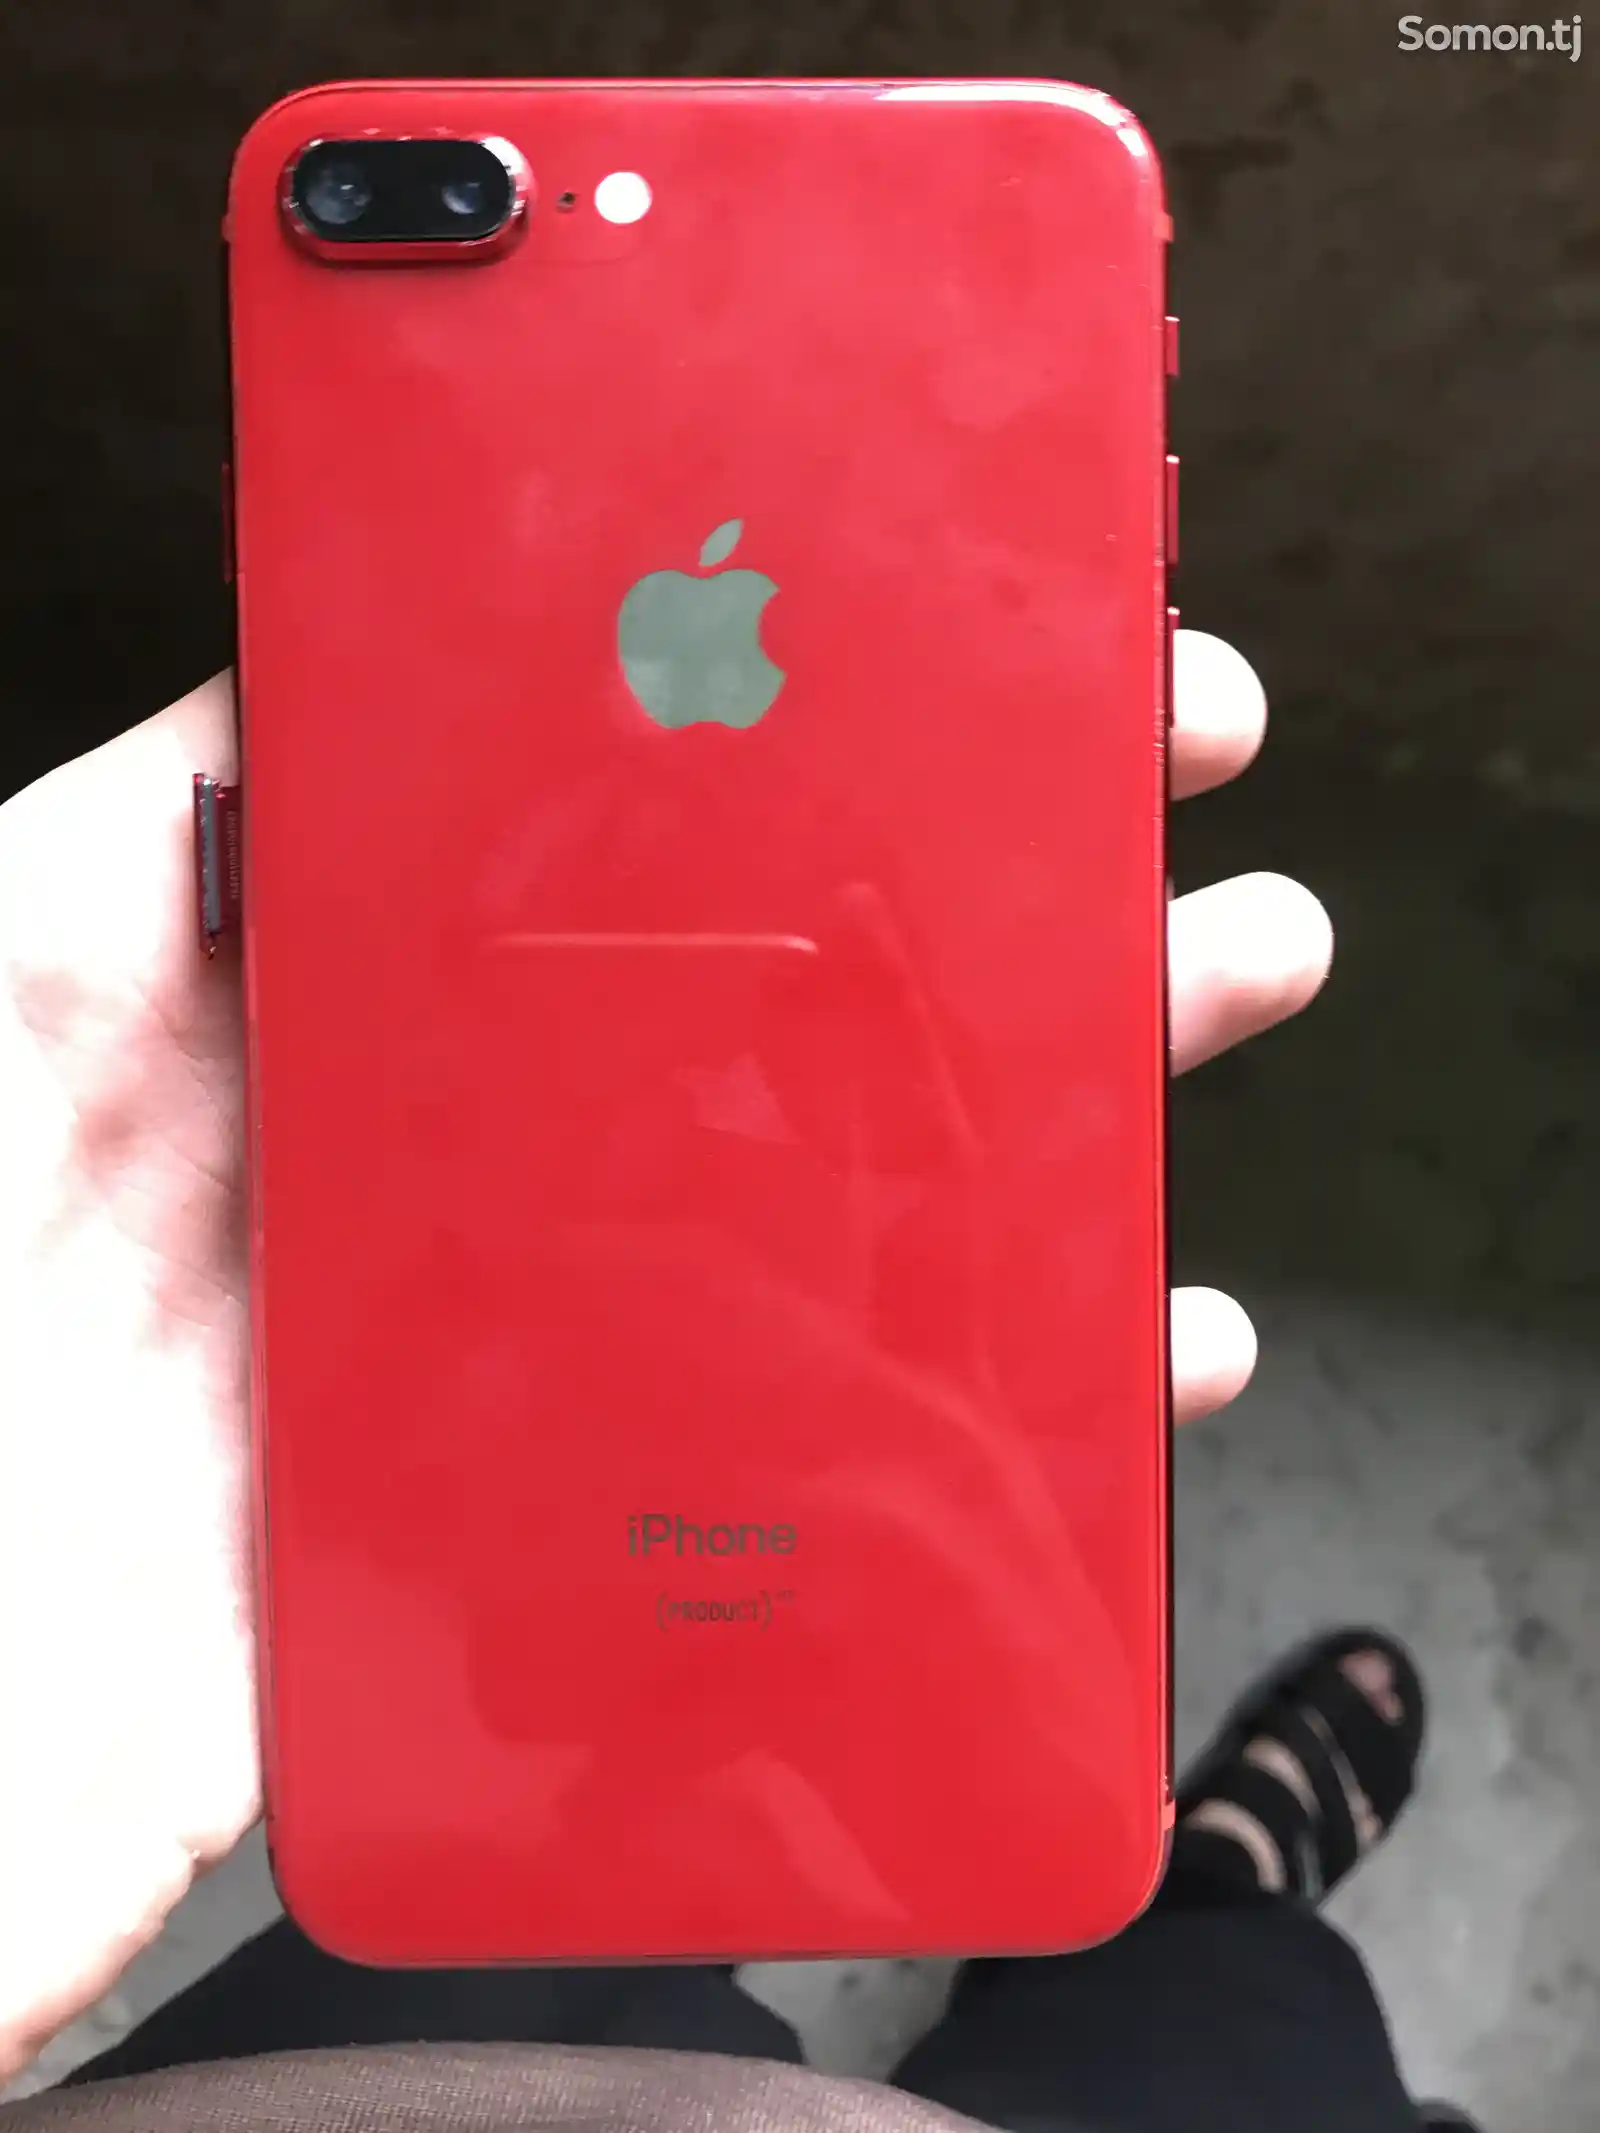 Apple iPhone 8 plus, 64 gb, Product Red-1